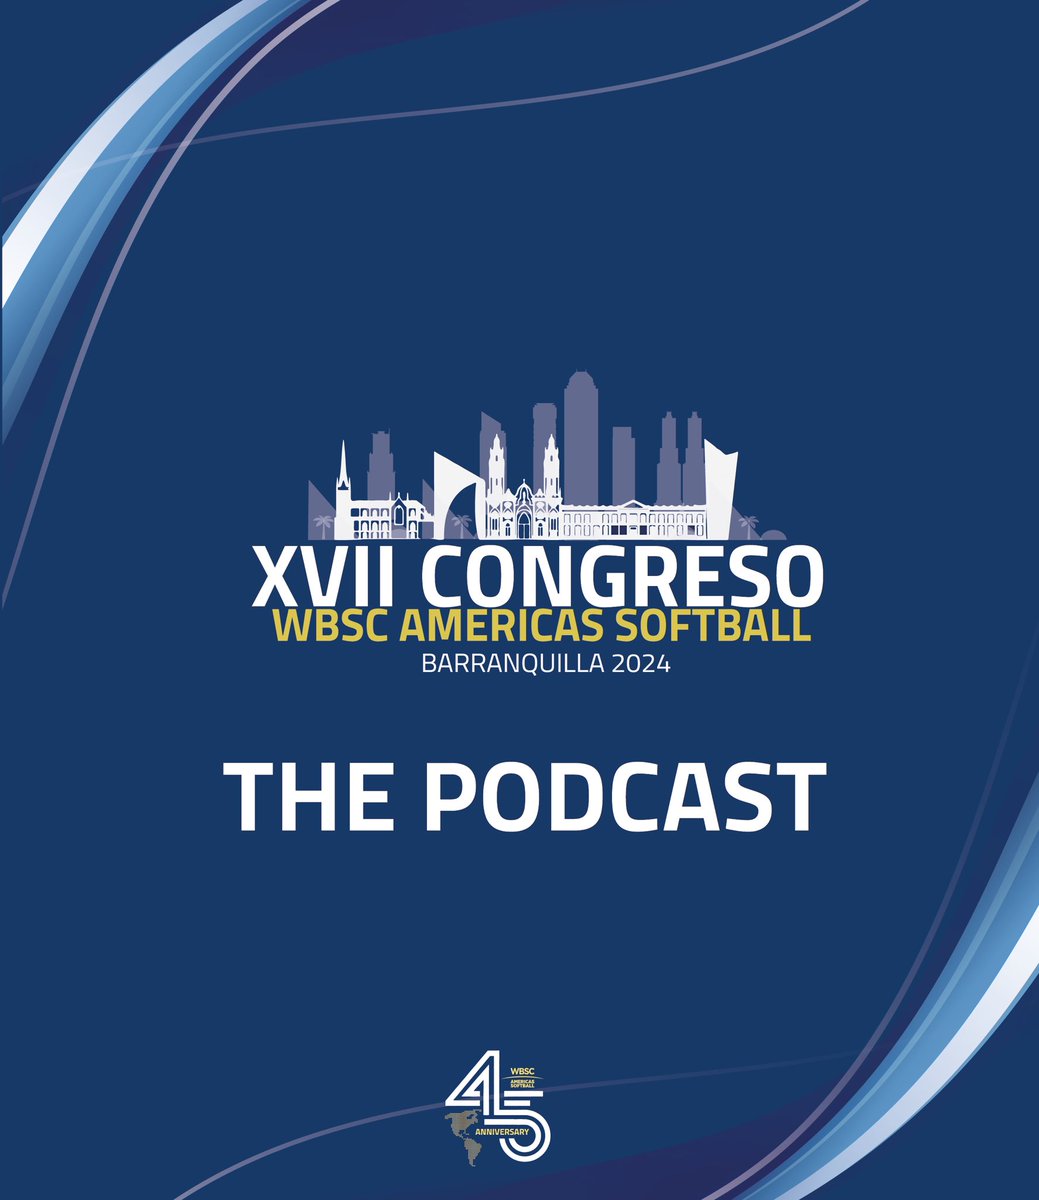 You can now watch the interviews of the national federations that belong to WBSC Americas Softball in THE PODCAST #americasSoftball LINK : youtube.com/playlist...